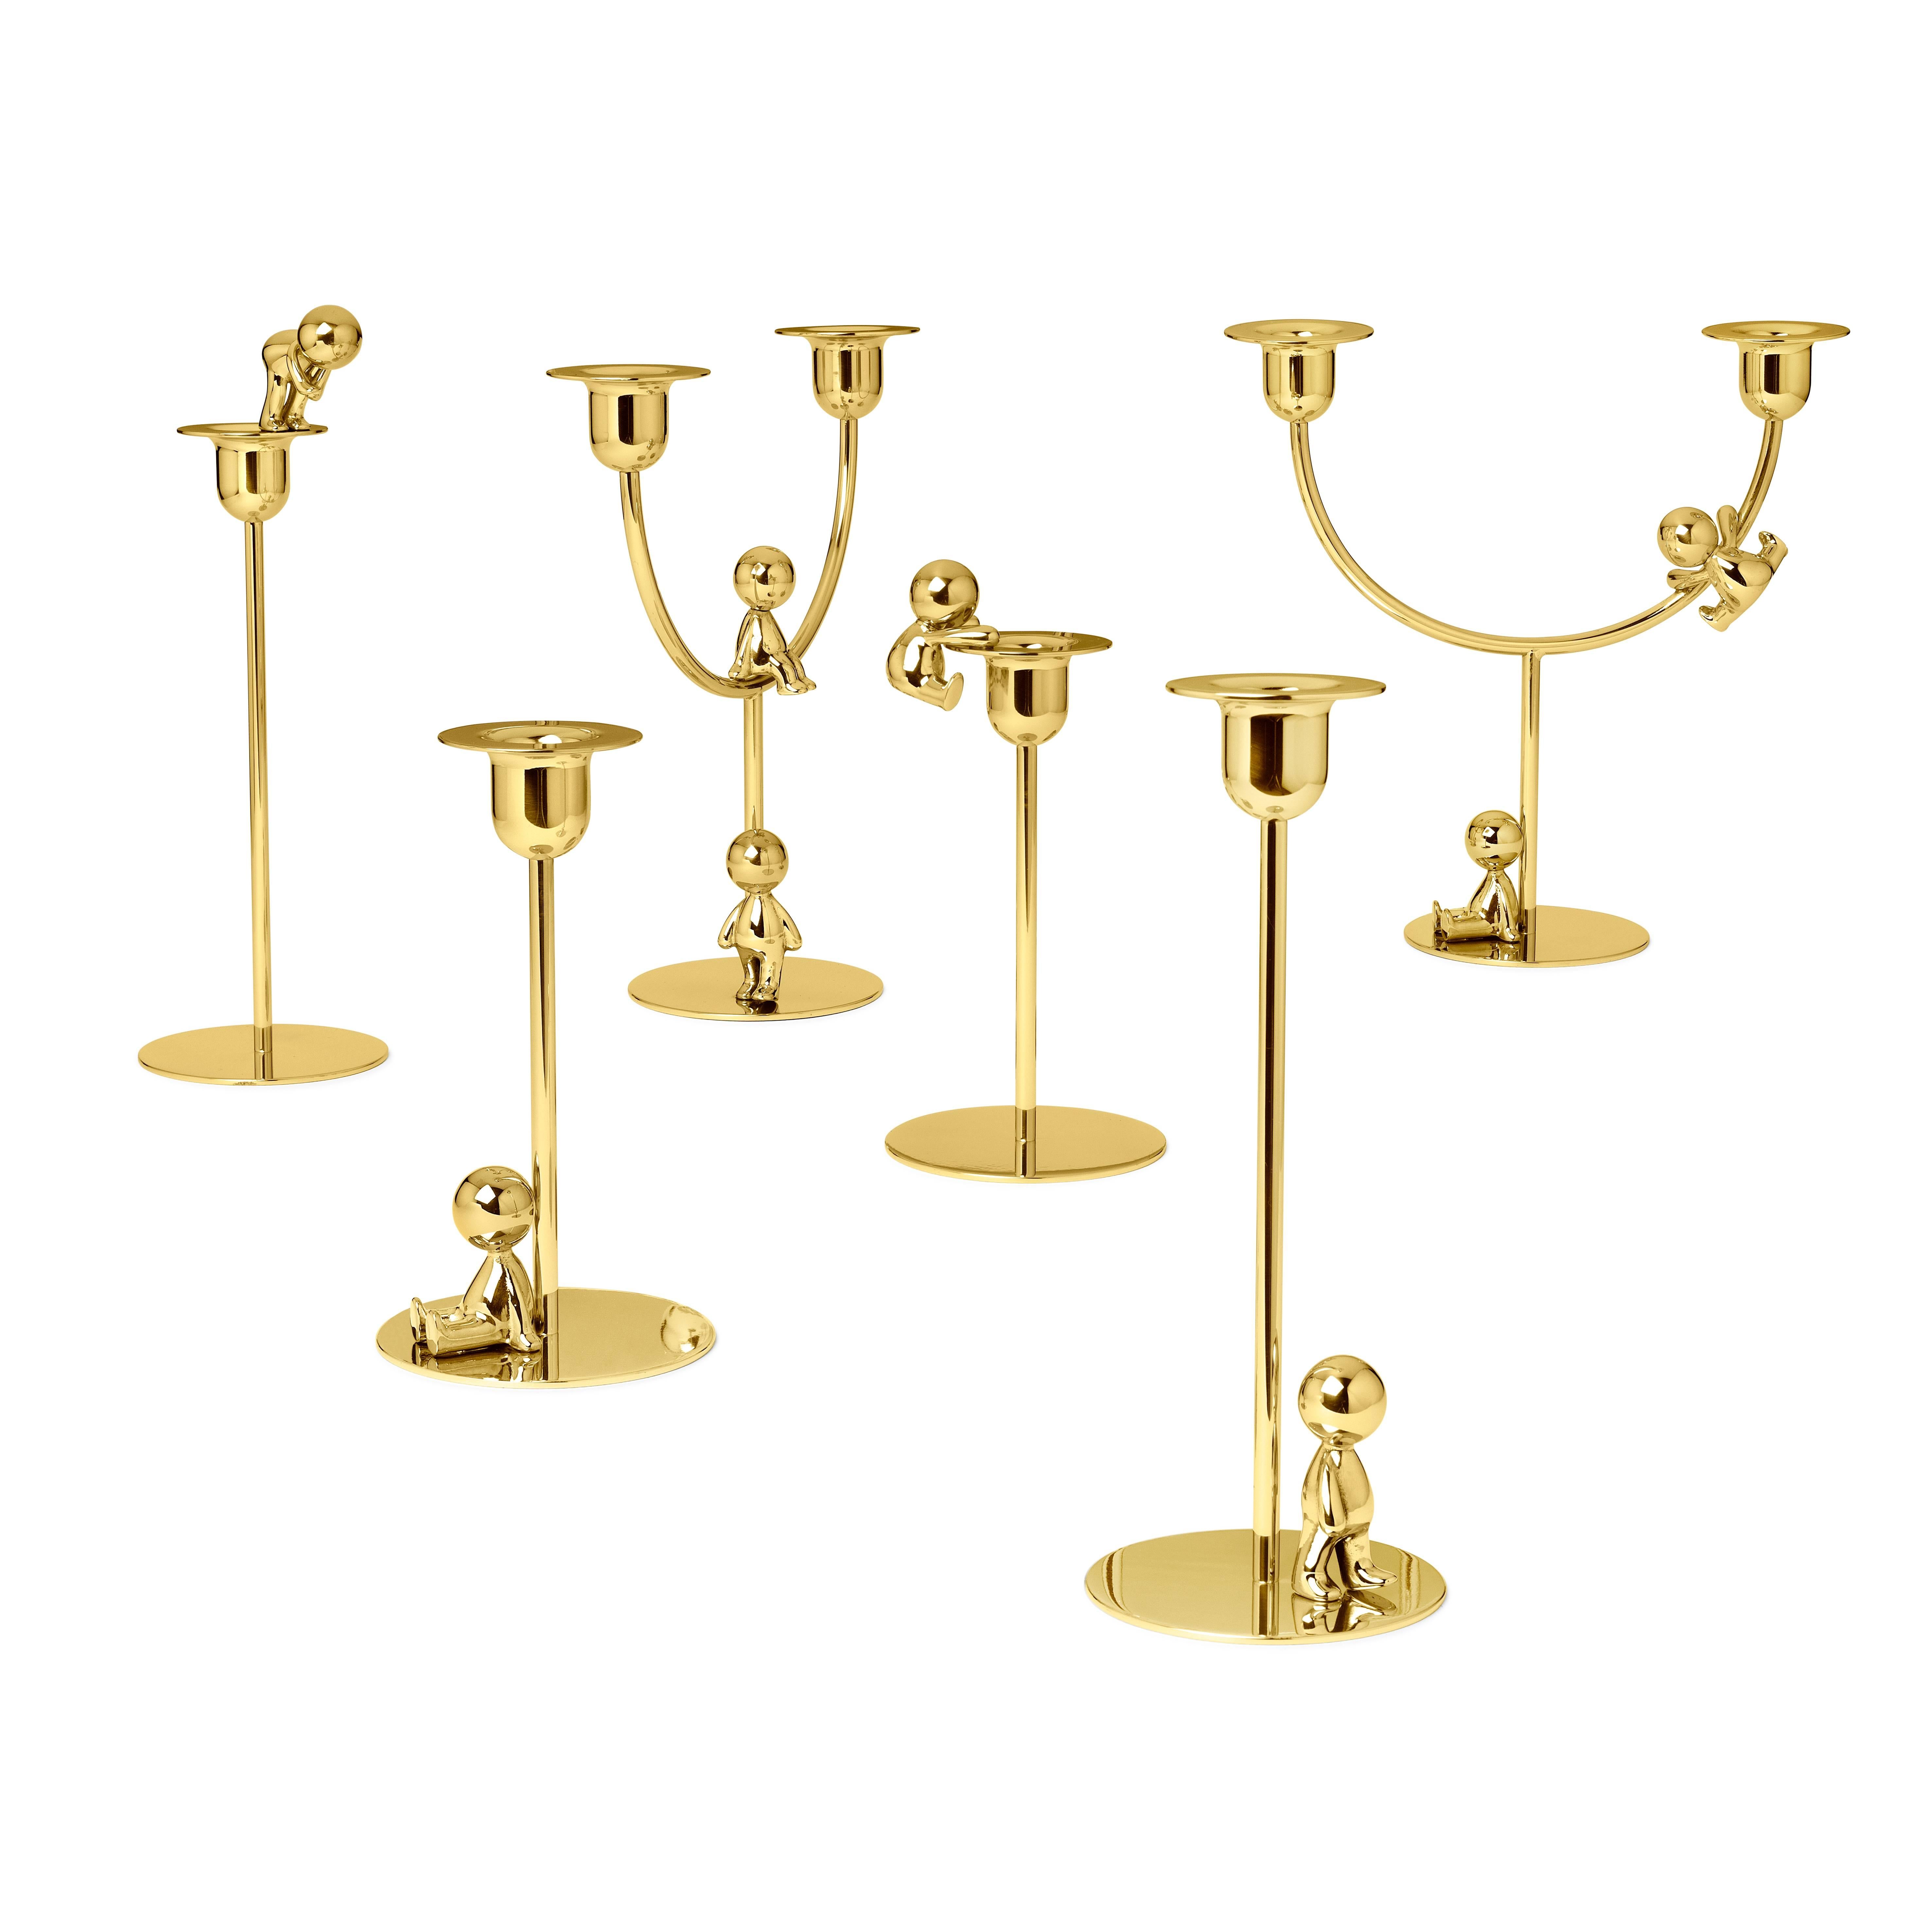 This delightful polished brass tall candlestick is a creative accent for any modern interior. Designed for taper candles, the streamlined design boasts a rounded bobeches with a wide rim supported by a short column and a flat base. A small figurine